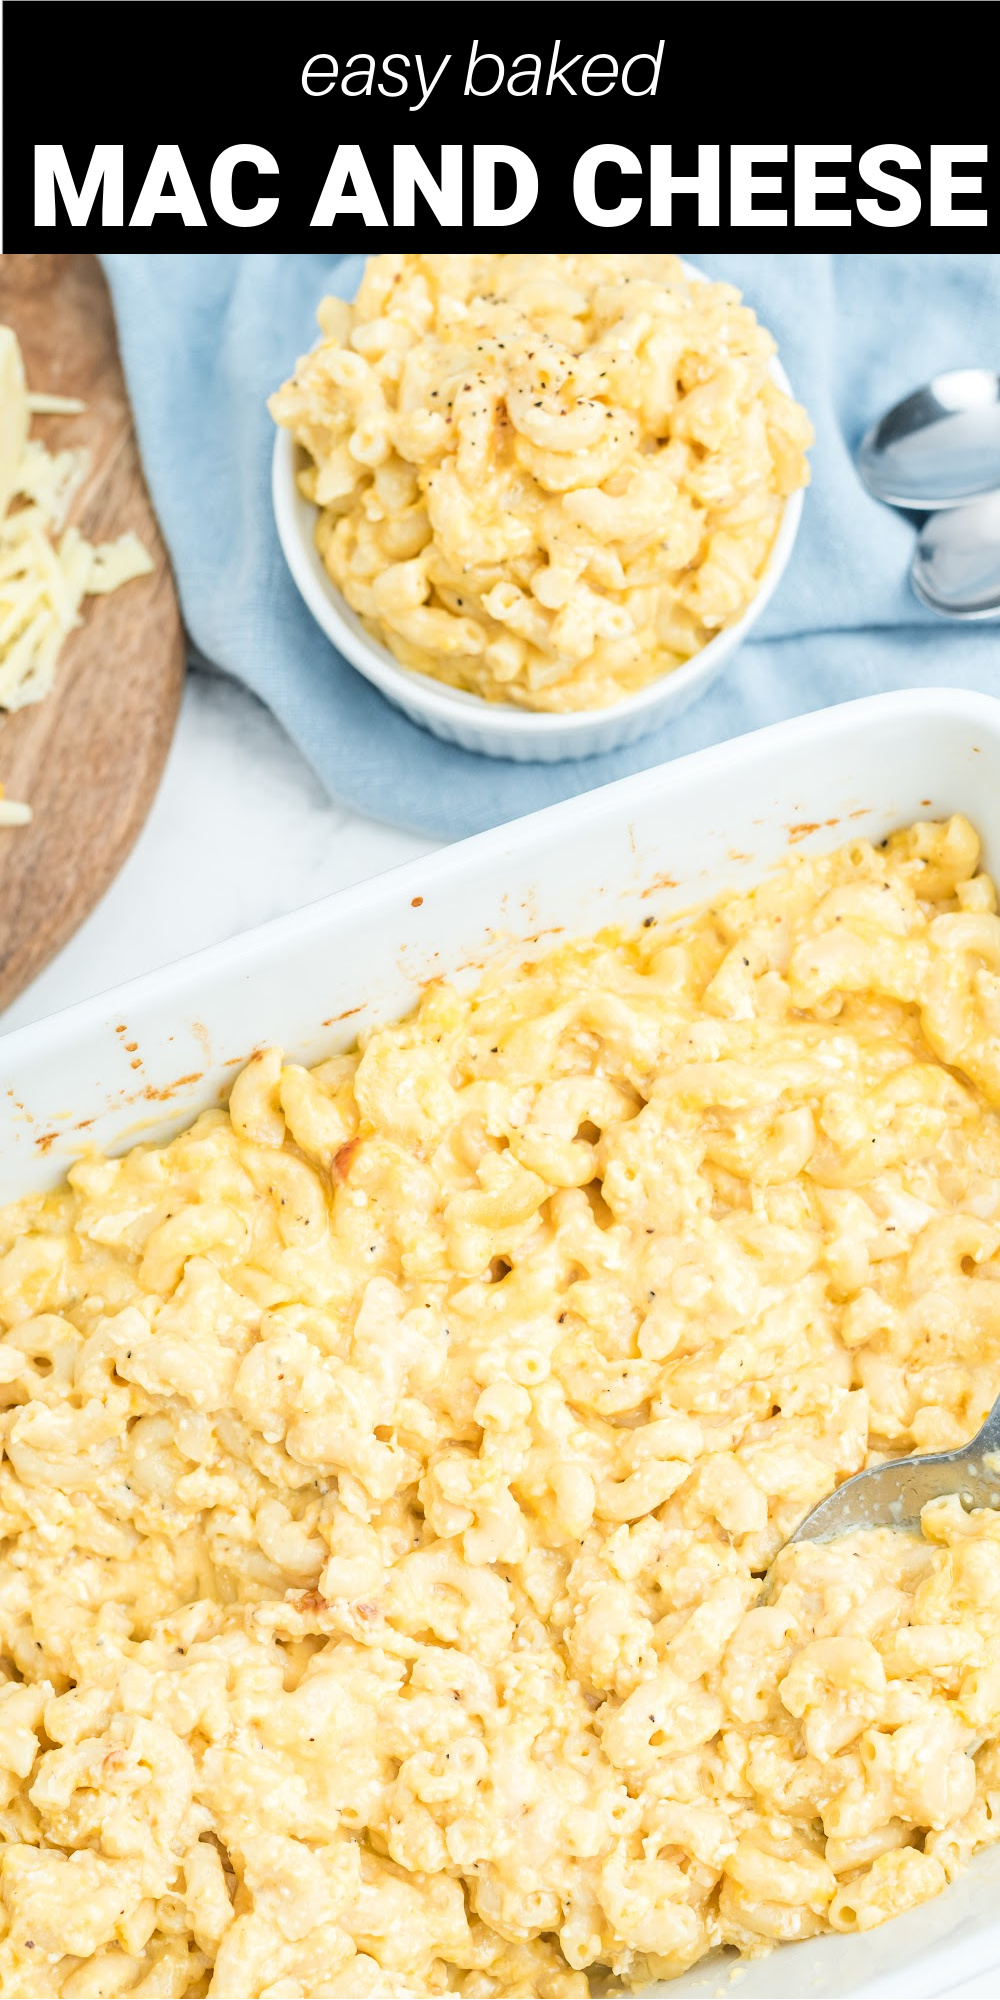 This easy Baked Mac and Cheese is the next level to your Mac and Cheese game that the whole family will love. It's a good old fashioned baked macaroni and cheese with creamy cheese sauce that's a classic mac and cheese!macaroni and cheese with creamy cheese sauce that's a classic mac and cheese!